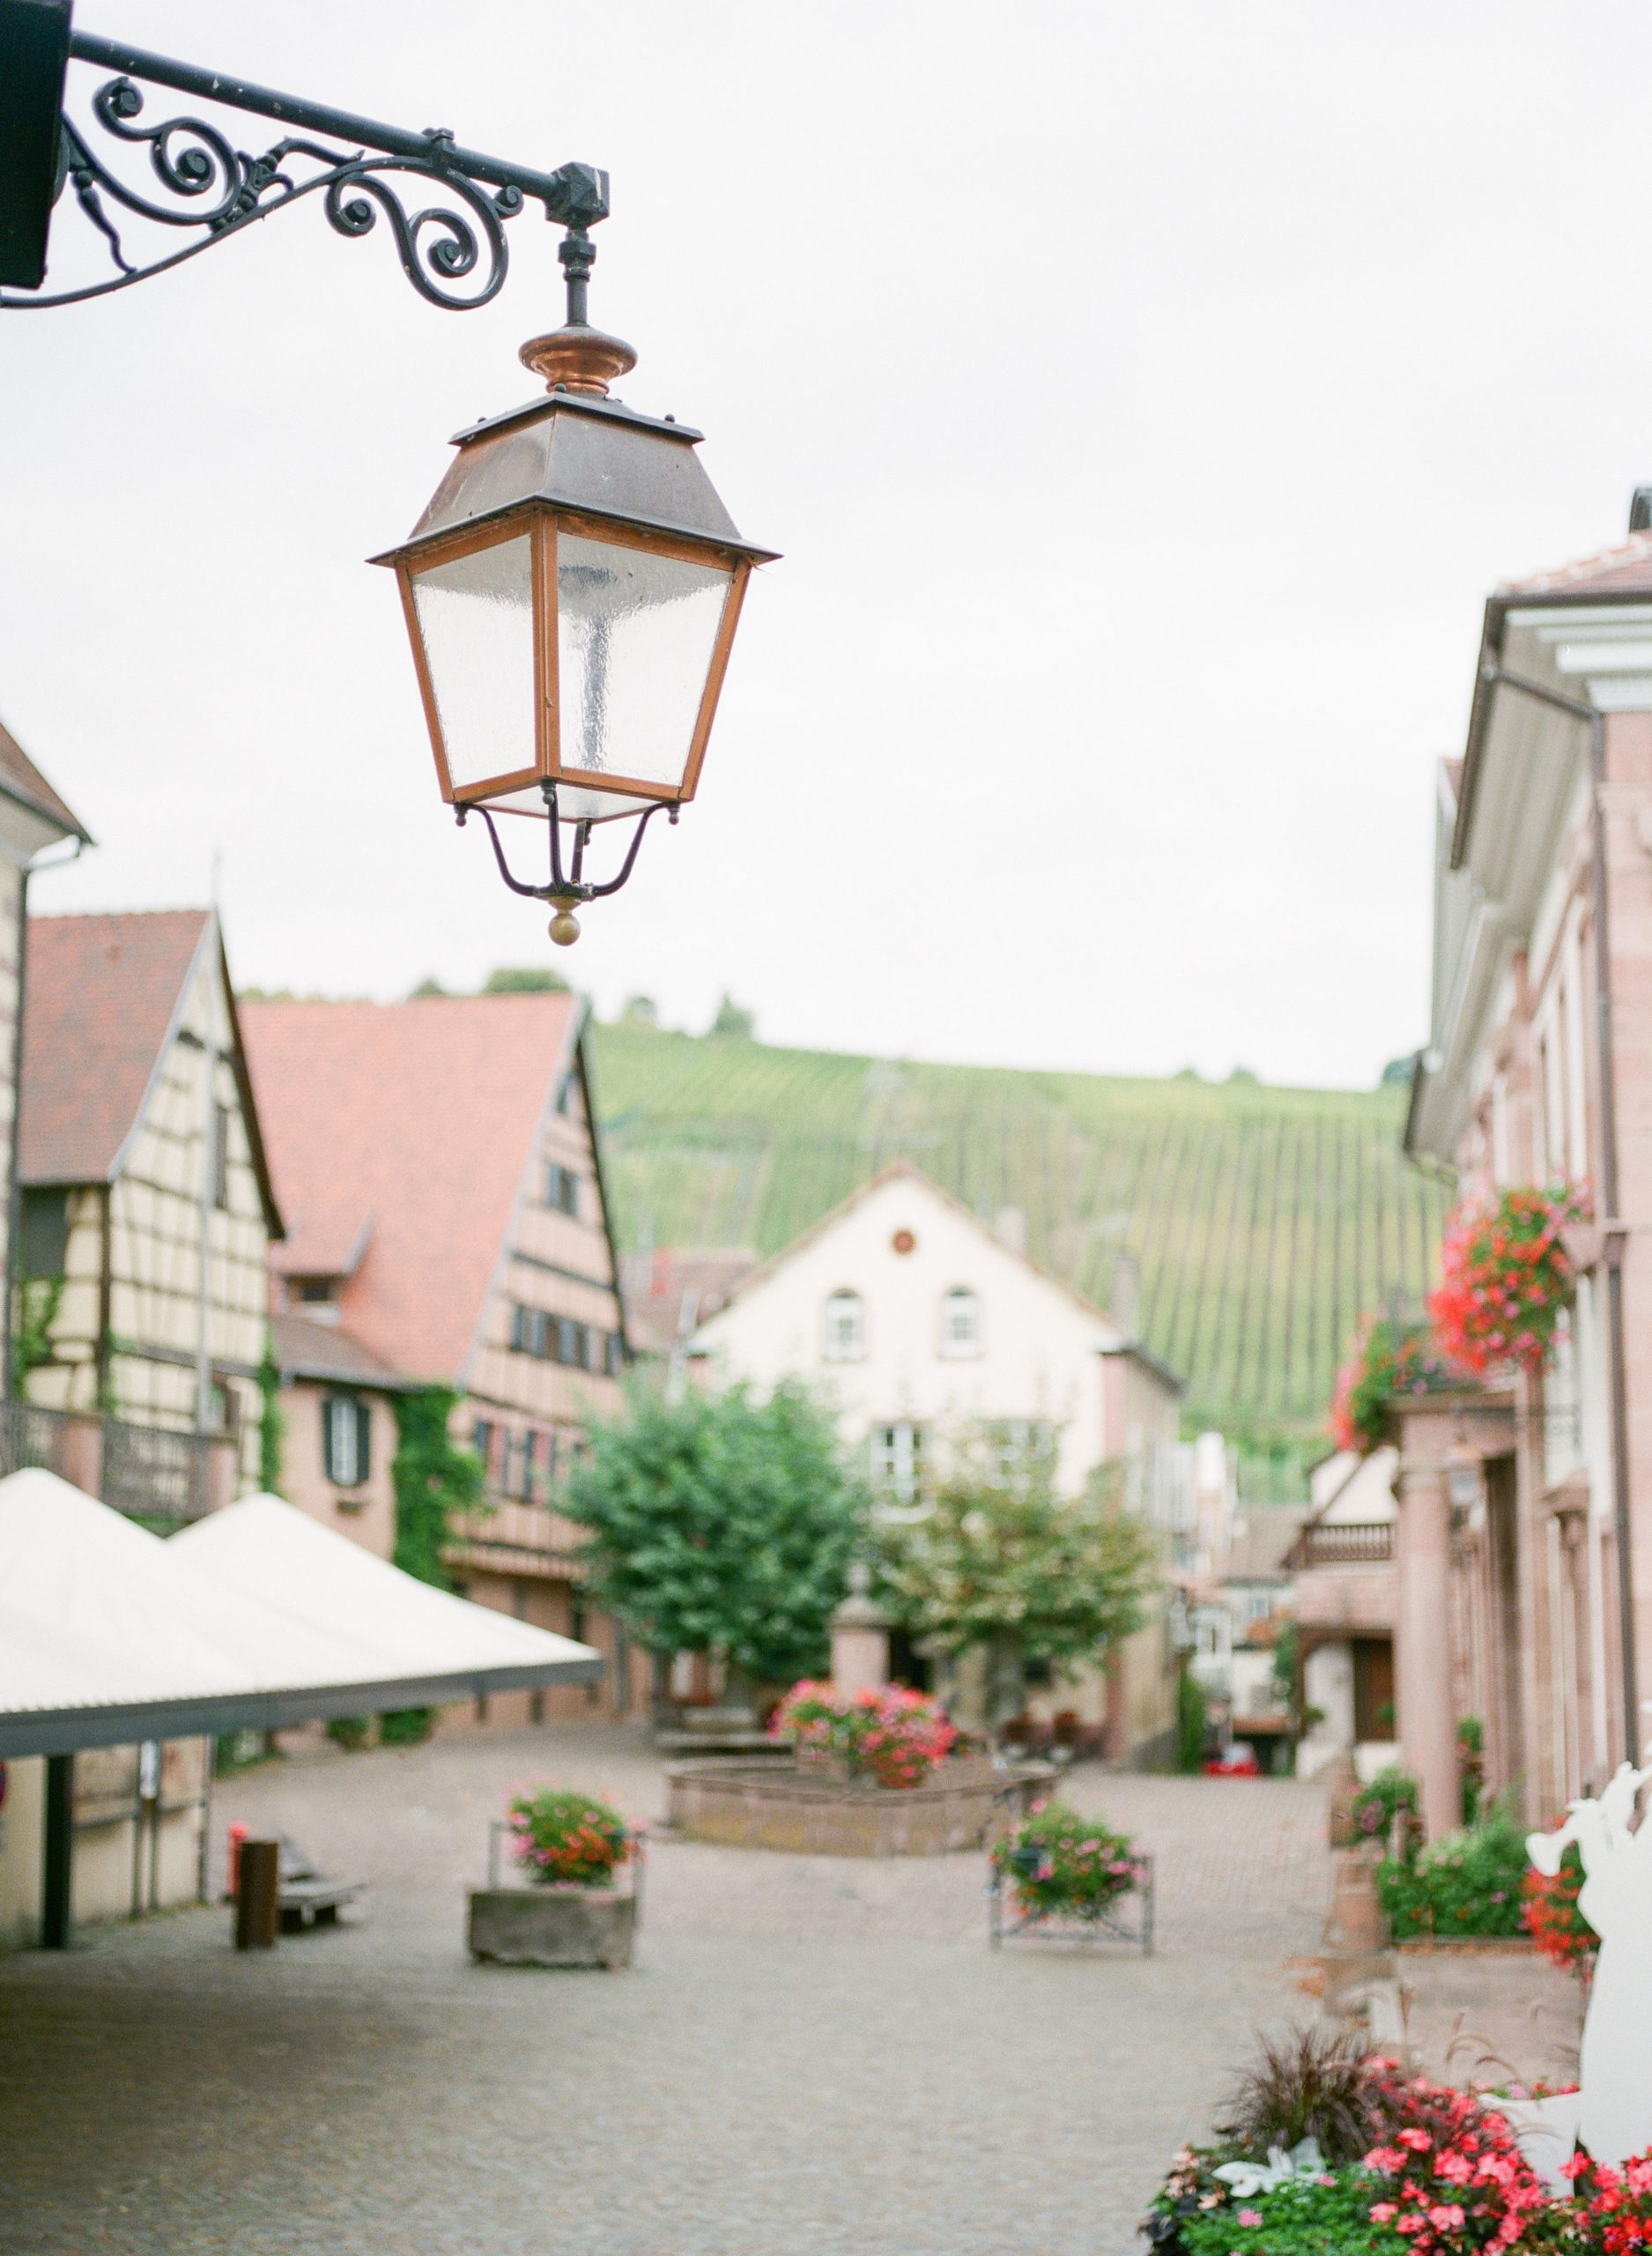 Washington, DC wedding photographer, Alicia Lacey, shares photos of her travels to Alsace, France and Zermatt, Switzerland.